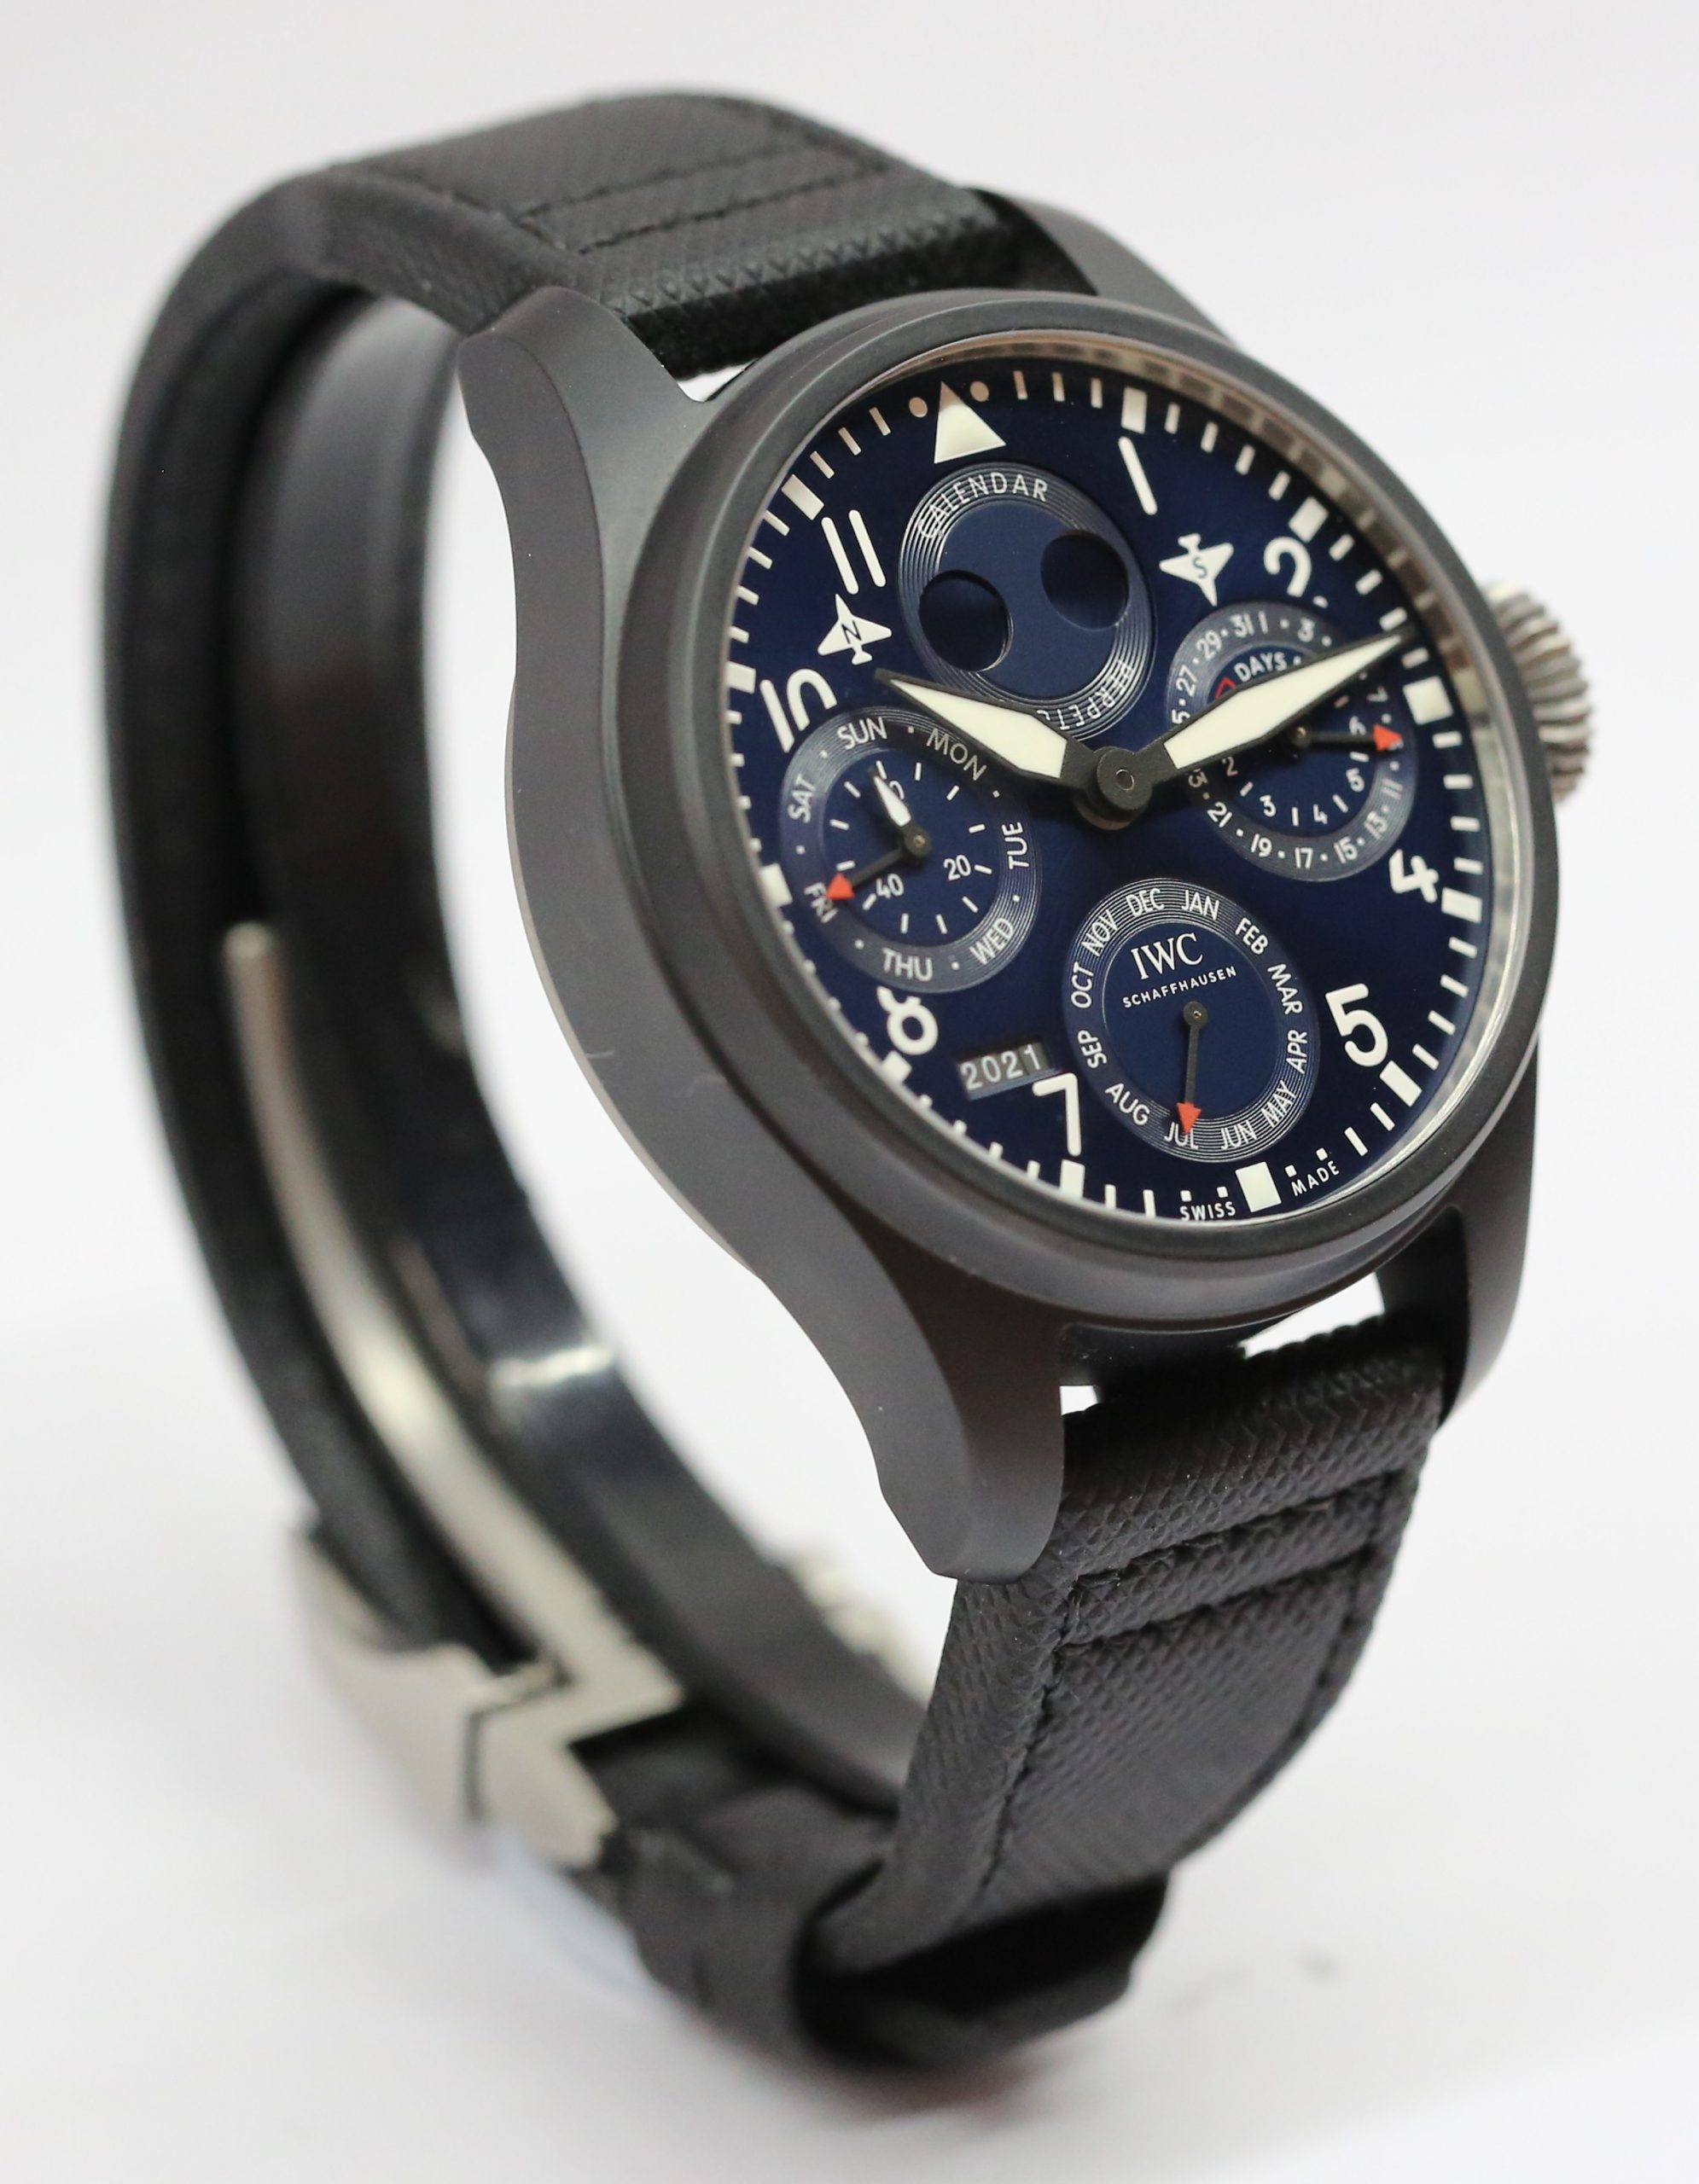 IWC Pilots Perpetual Calendar "Rodeo Drive Edition", in Ceramic, on